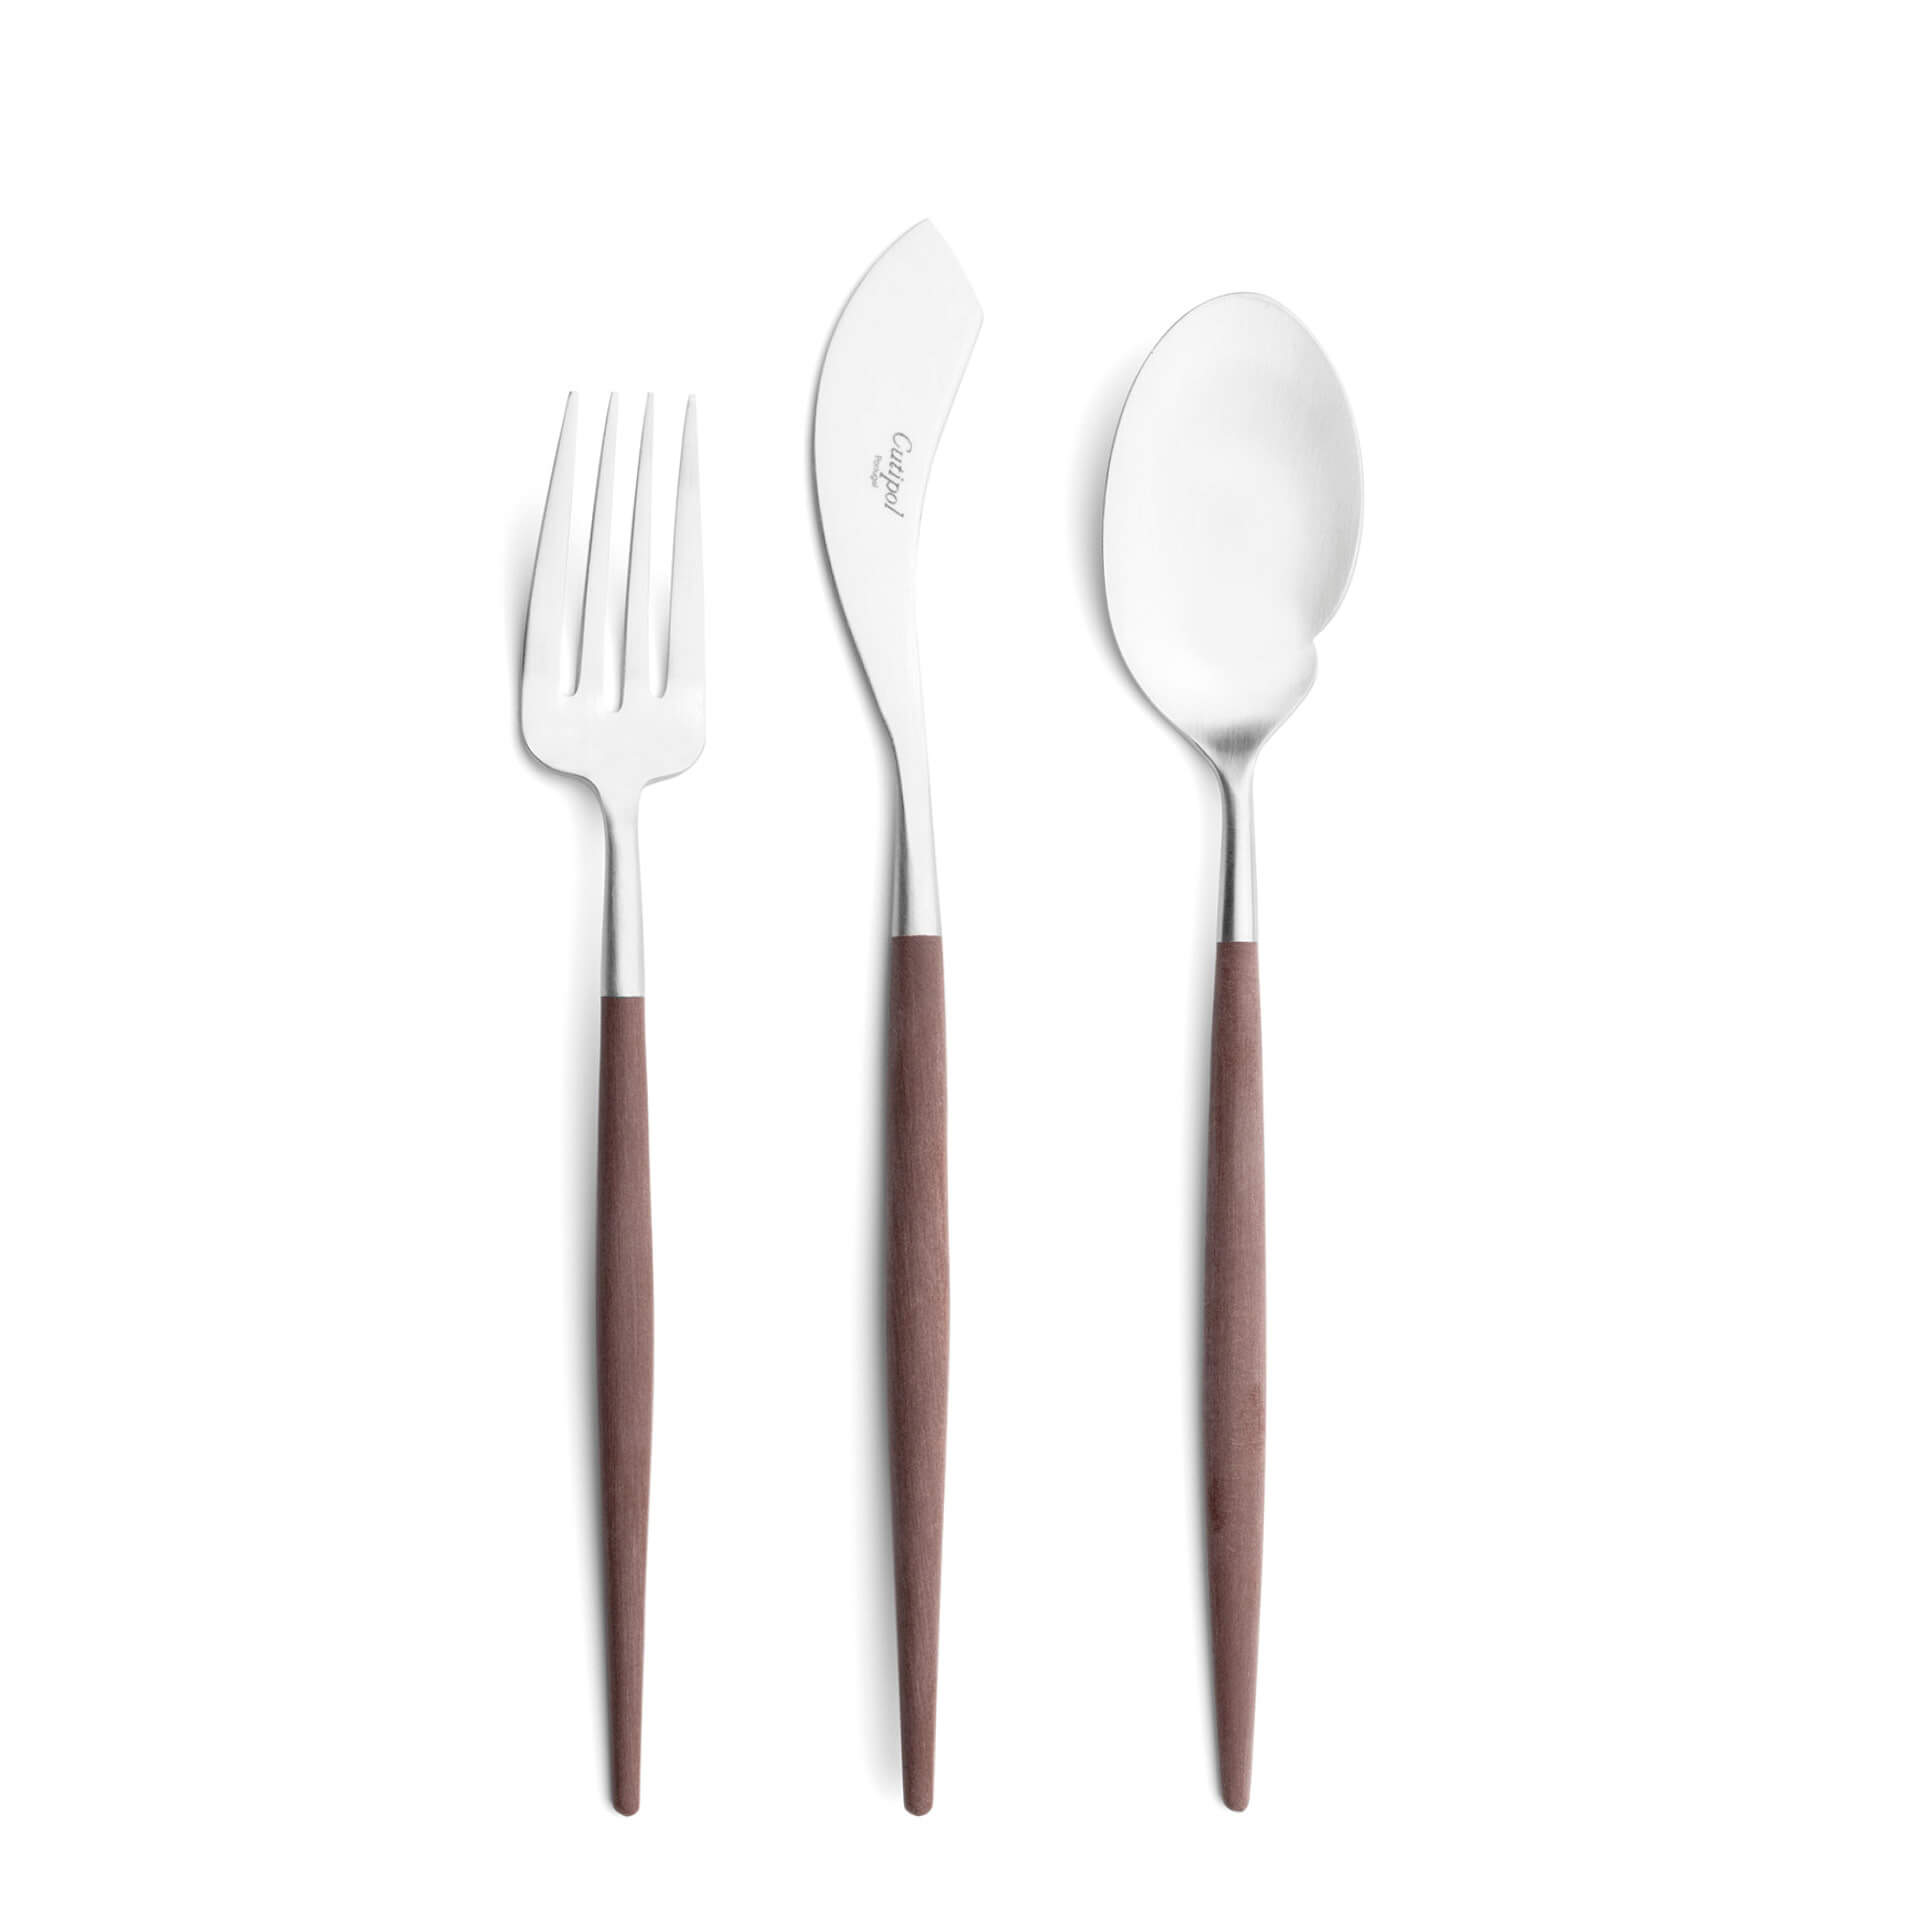 Cutipol Cutlery Goa Brown with fish fork, fish knife and gourmet spoon